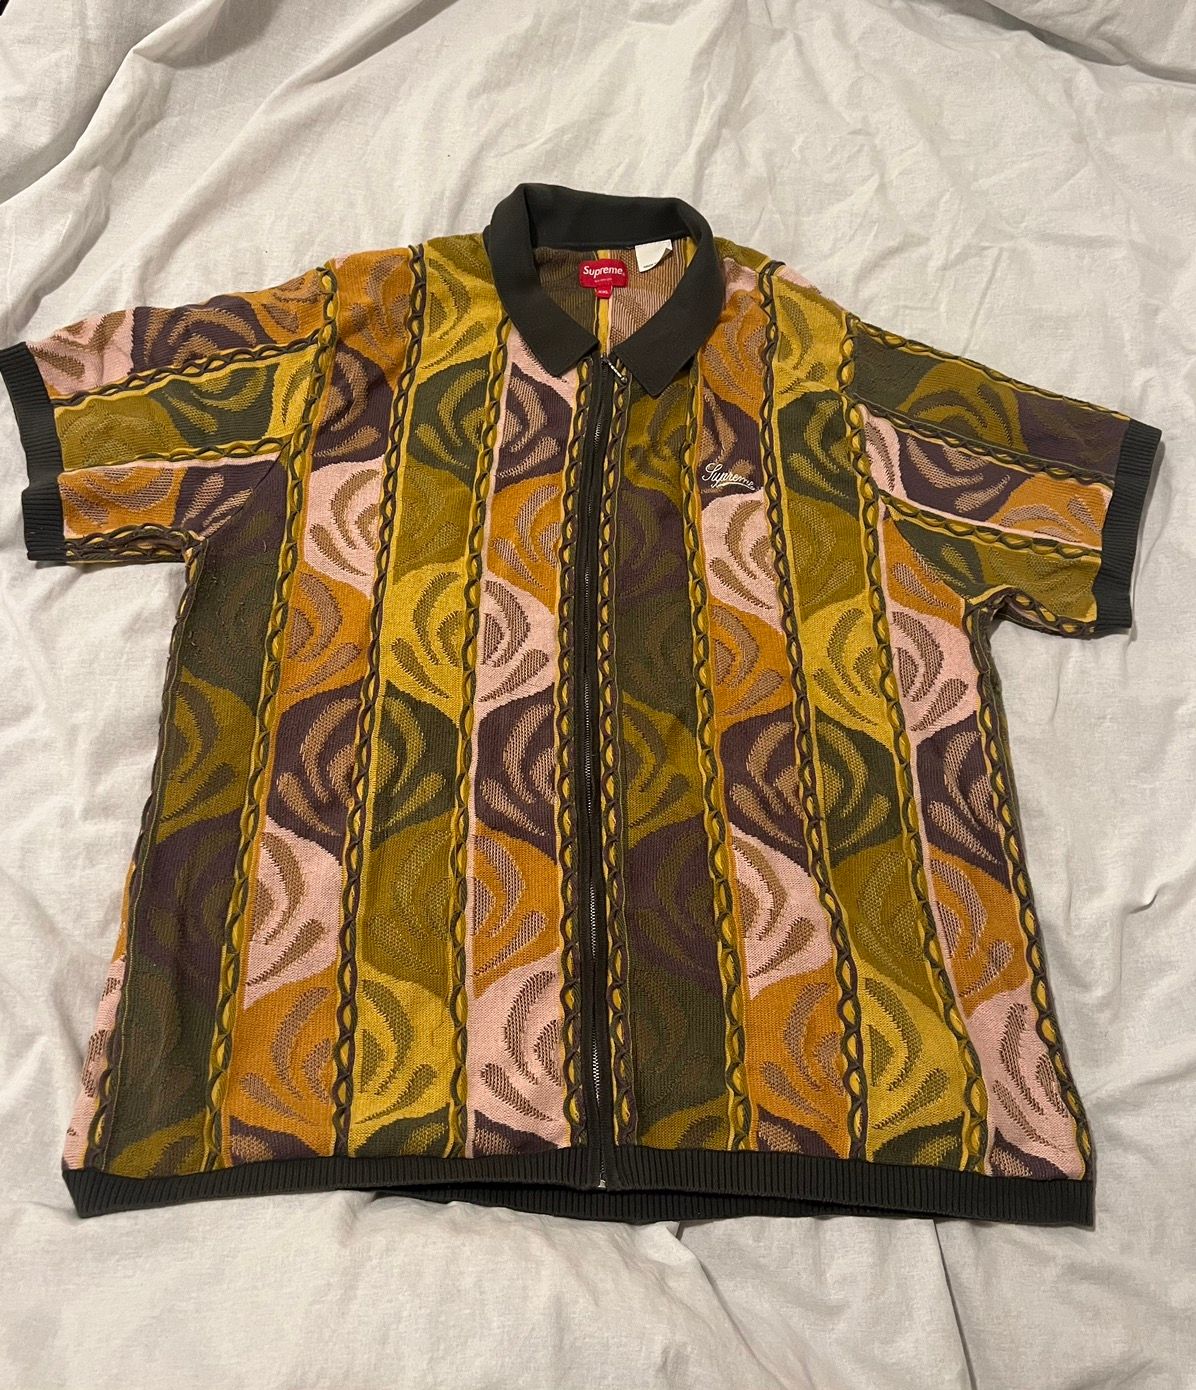 Supreme Supreme Abstract Textured Zip Up Polo   Grailed